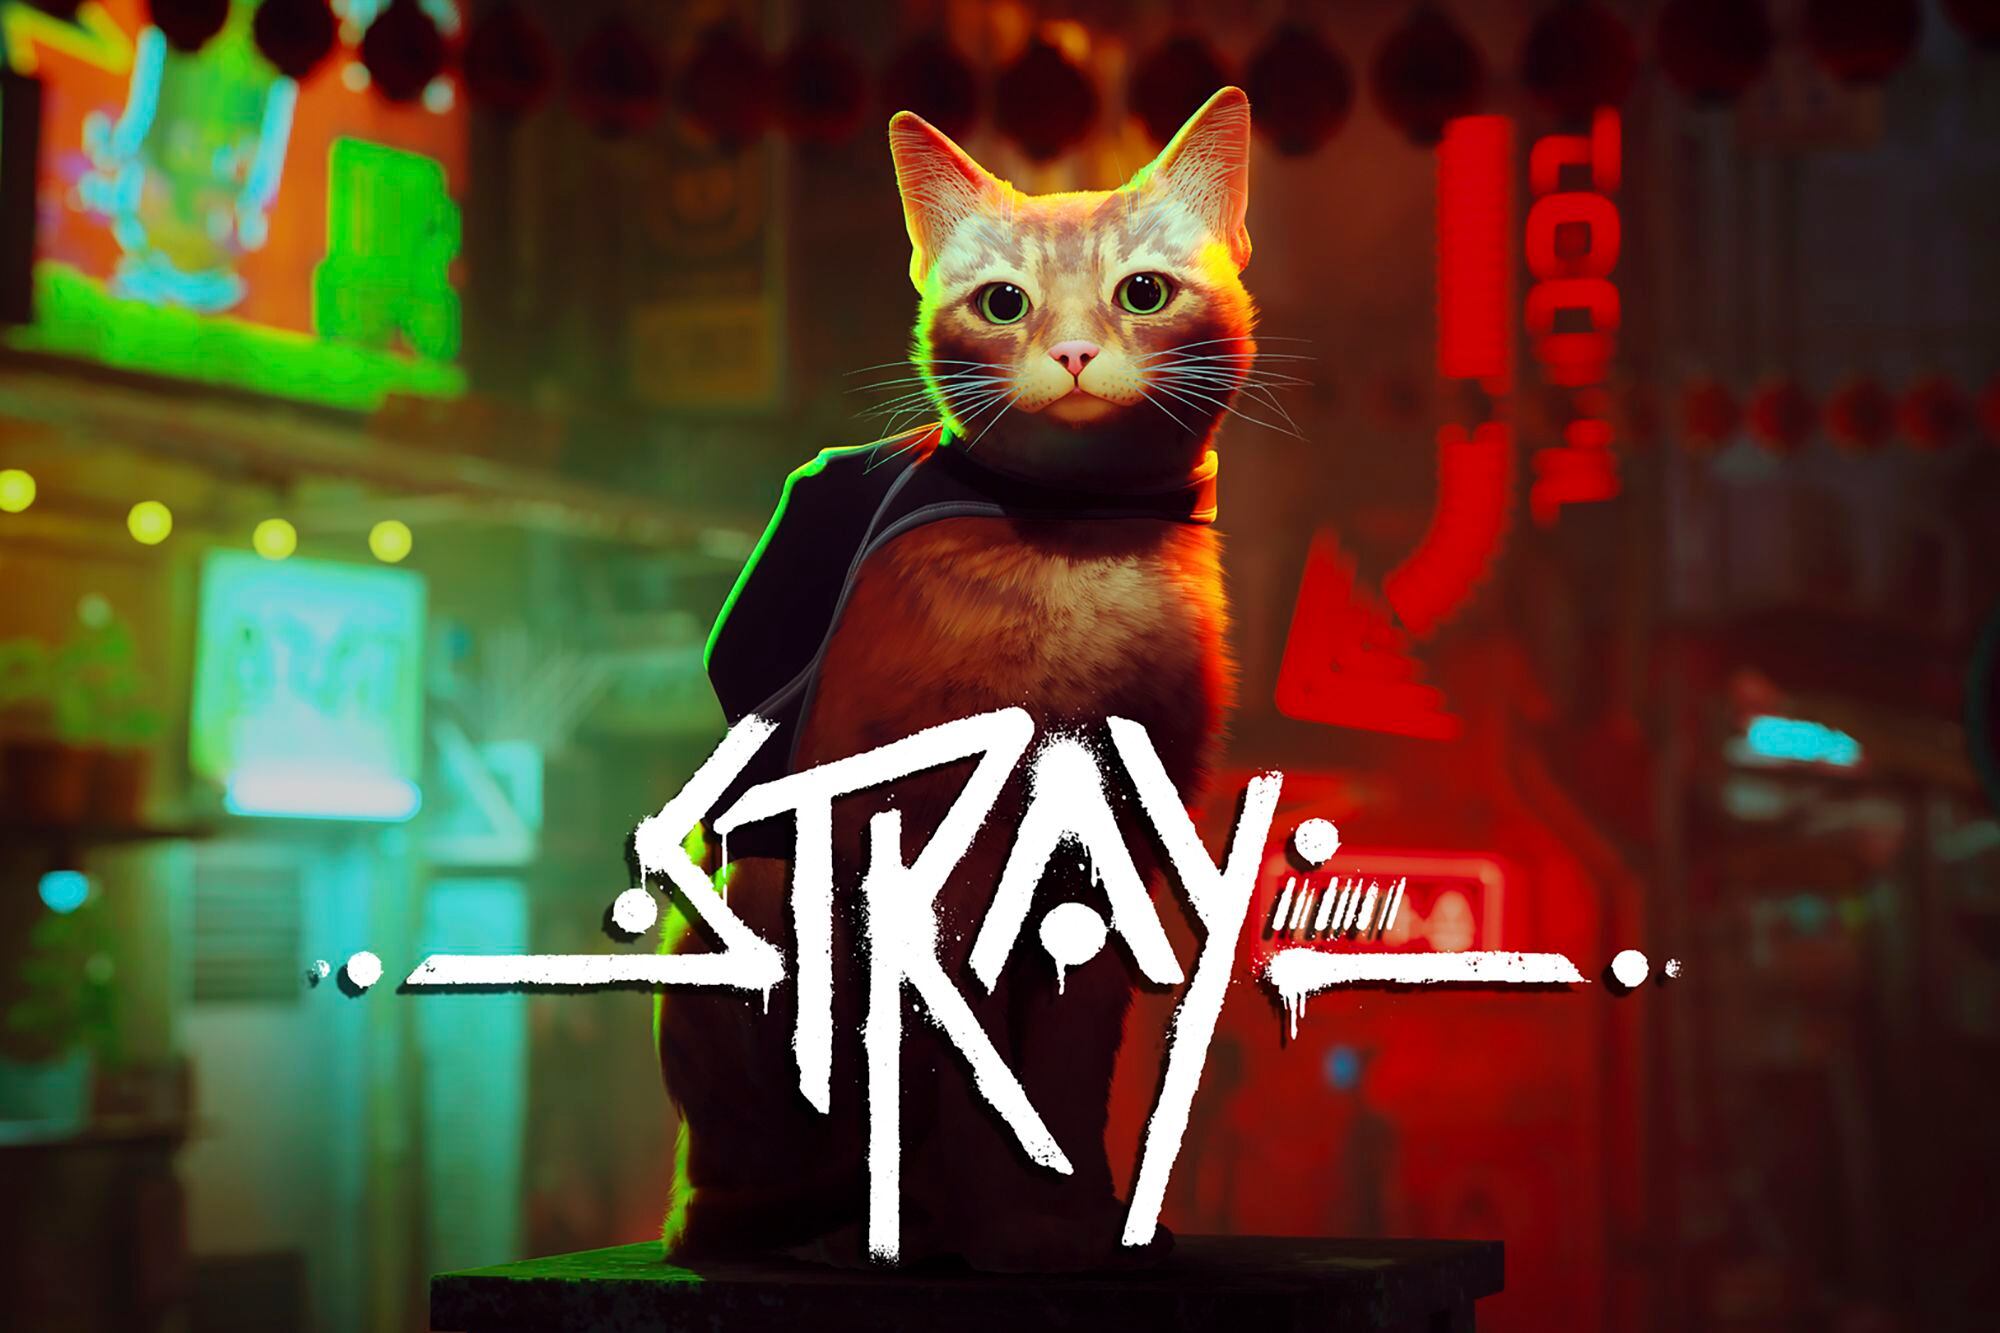 “Stray” cat video game brings some benefits to real cats